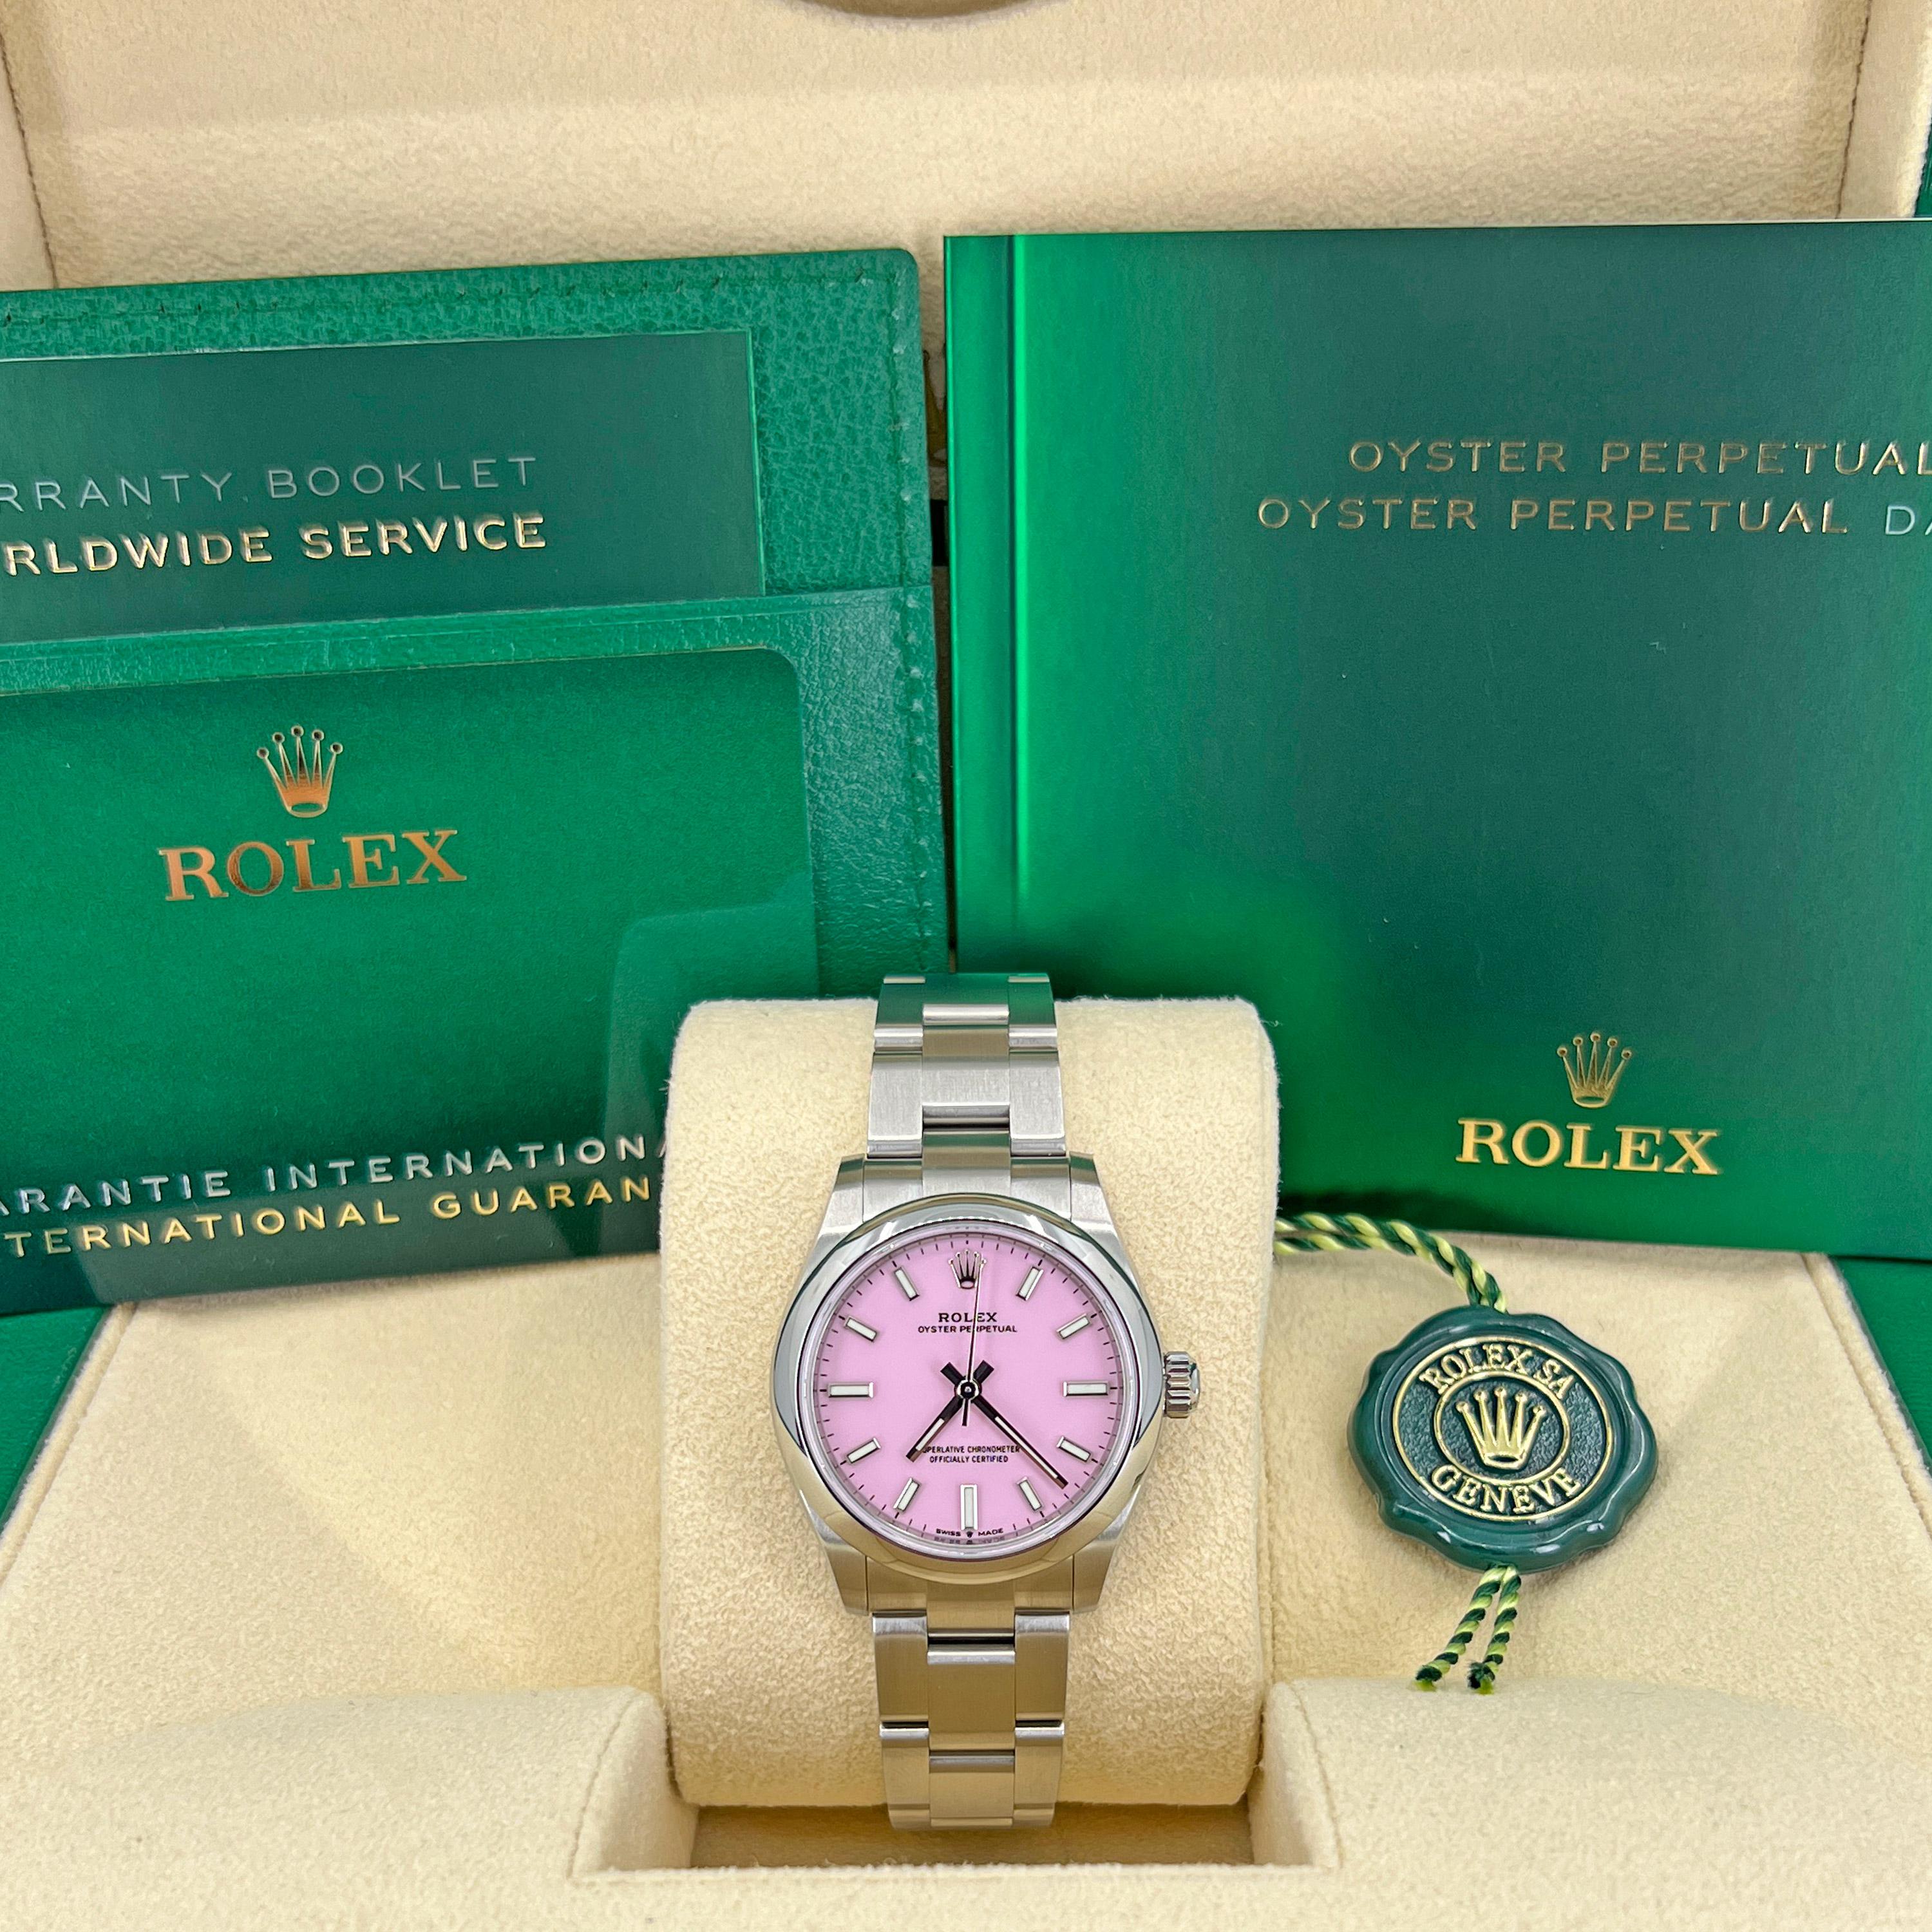 31 mm Oystersteel case, screw-down crown with twinlock double waterproofness system, domed bezel, scratch-resistant sapphire crystal, candy pink dial, index hour markers, Rolex calibre 2232 automatic movement with center hour, minute and seconds